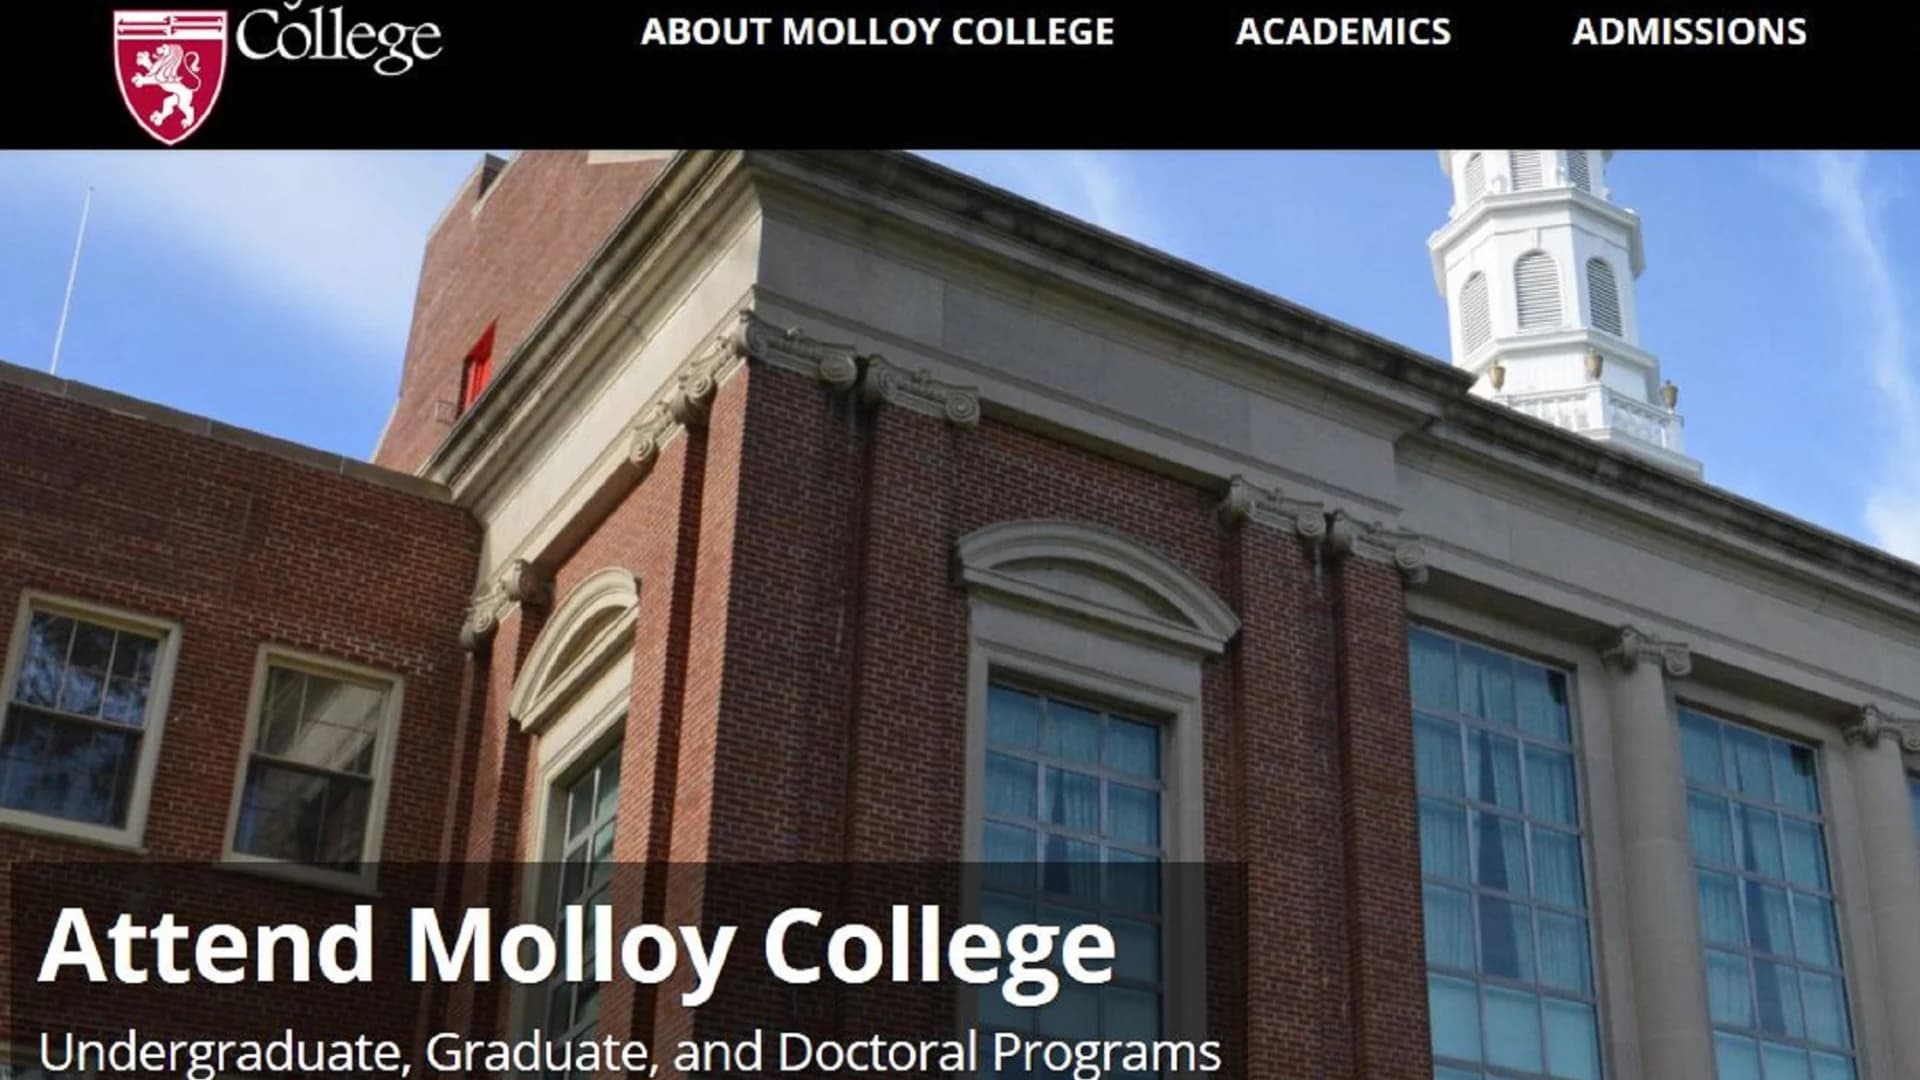 Molloy College to resume full-time in-person classes beginning September 2021